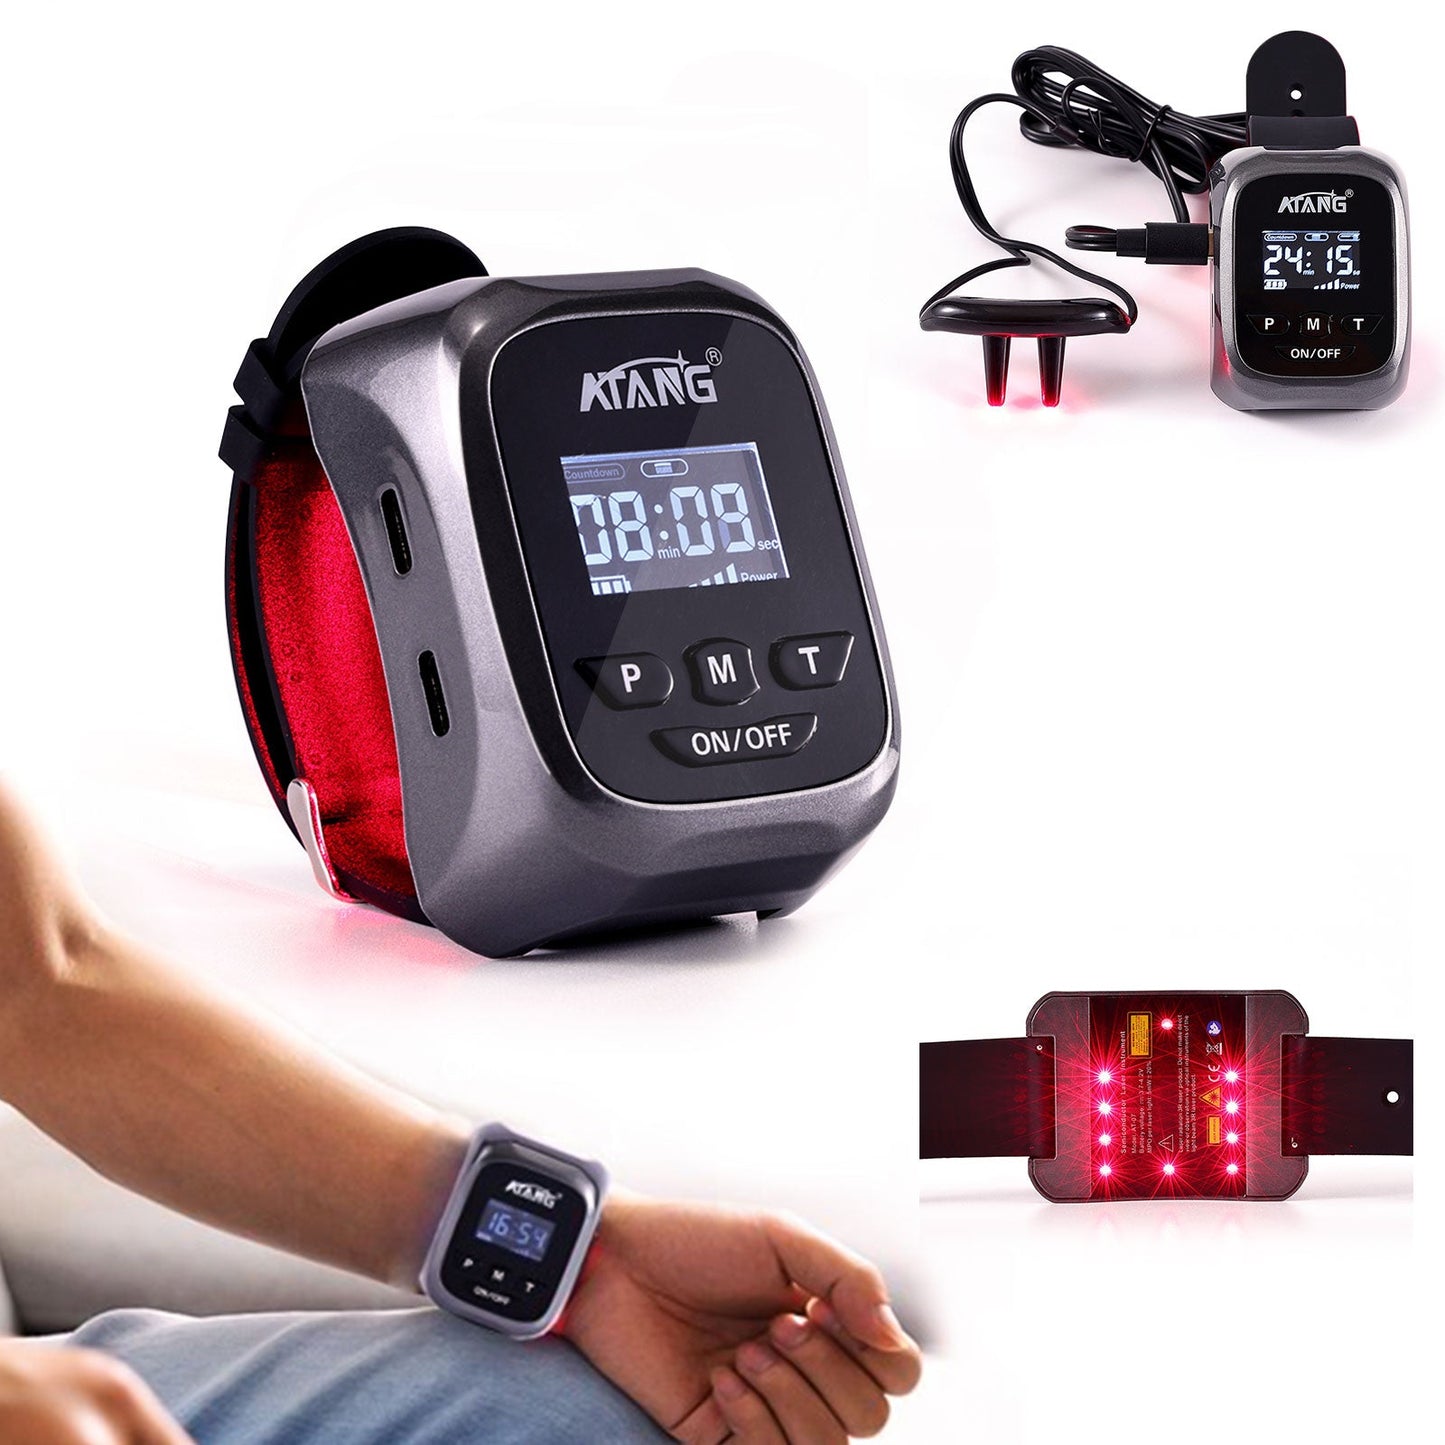 Cold Laser for Stroke Relief Healthcare Supply Targeting Diabetes Symptoms Hypertension Cardiovascular Disease